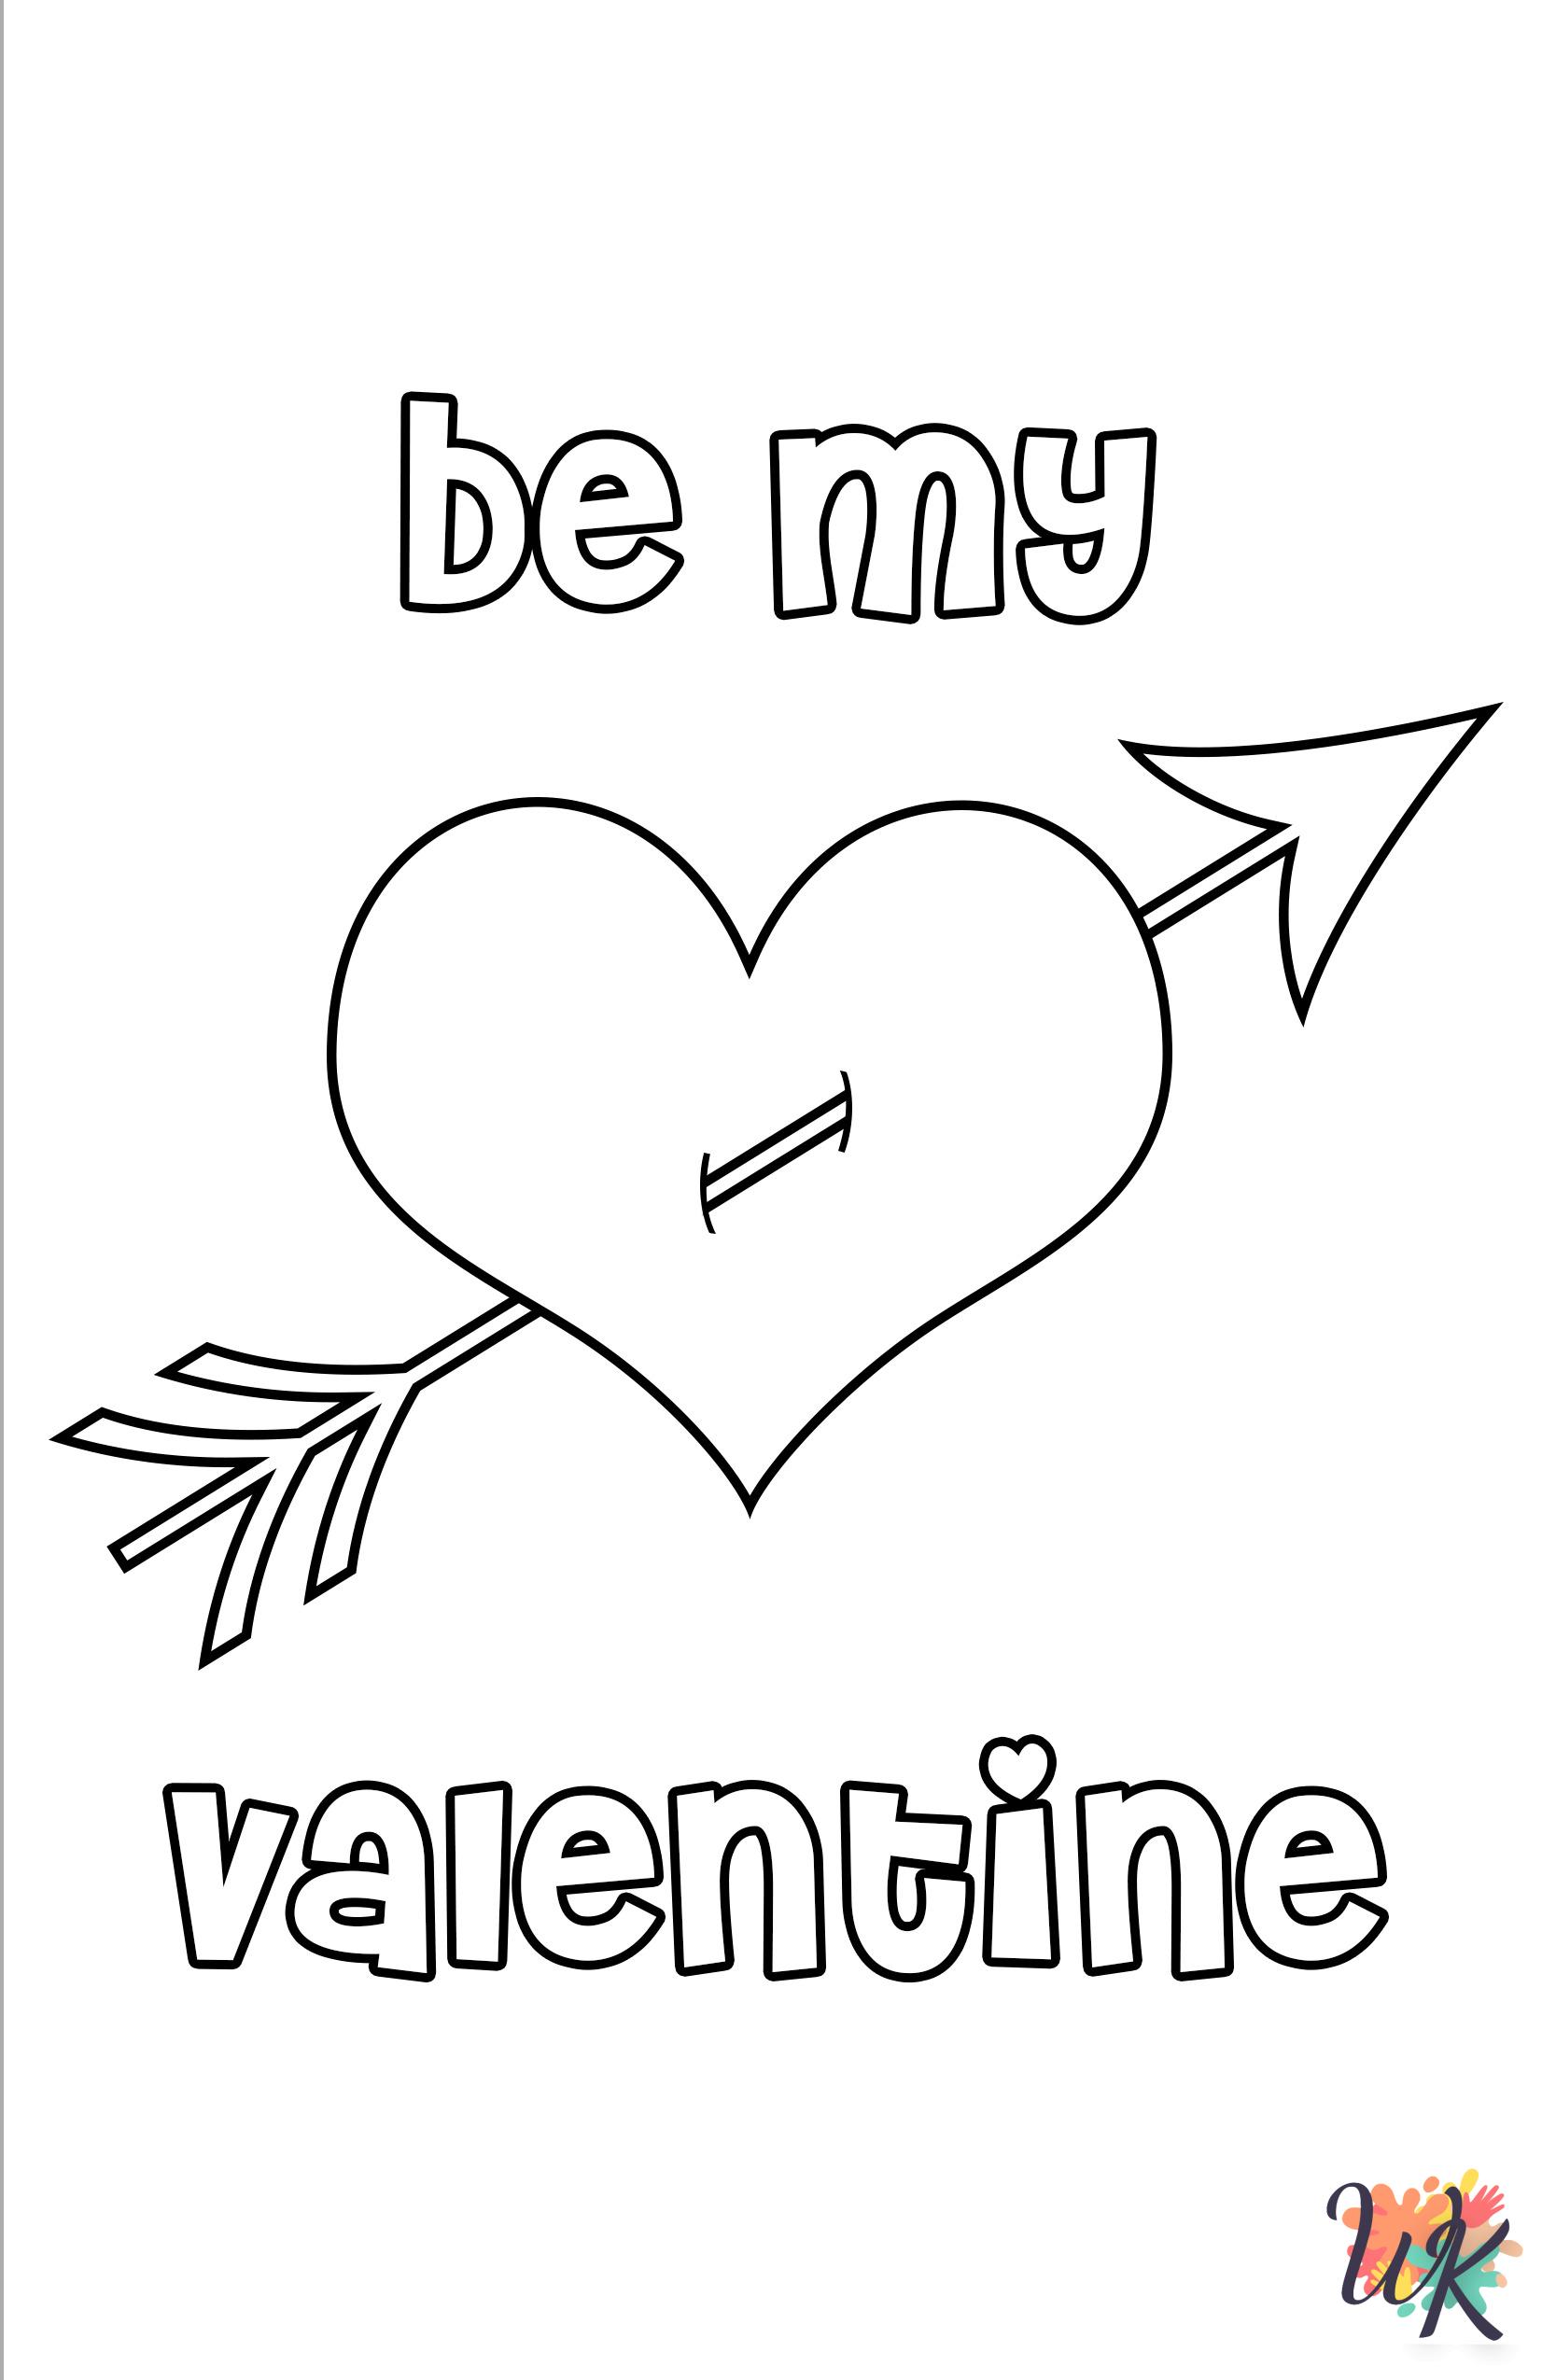 detailed Valentine's Day coloring pages for adults